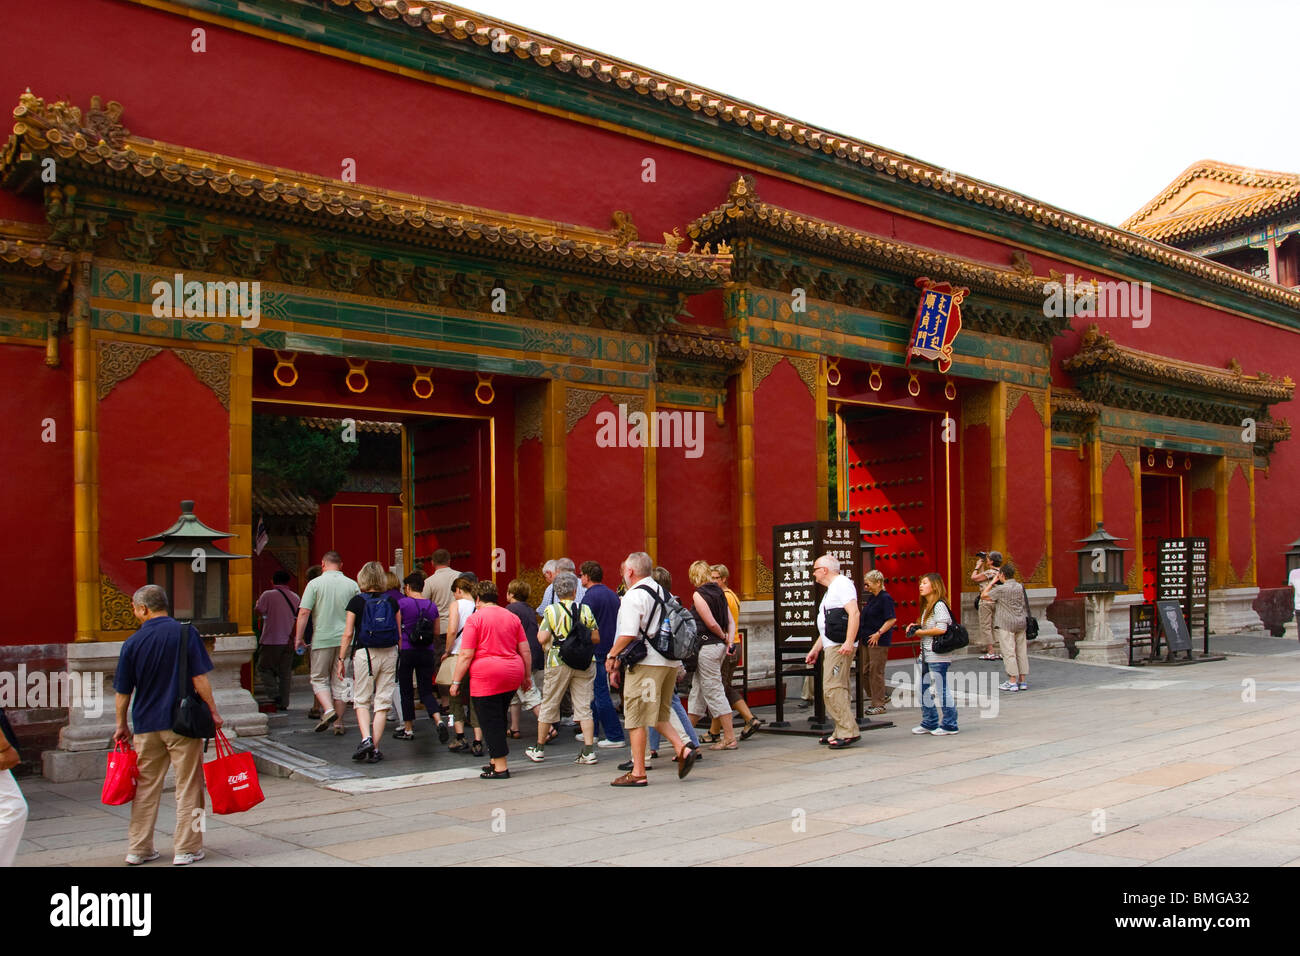 Gate Of Obedience And Chastity, Forbidden City, Beijing, China Stock Photo